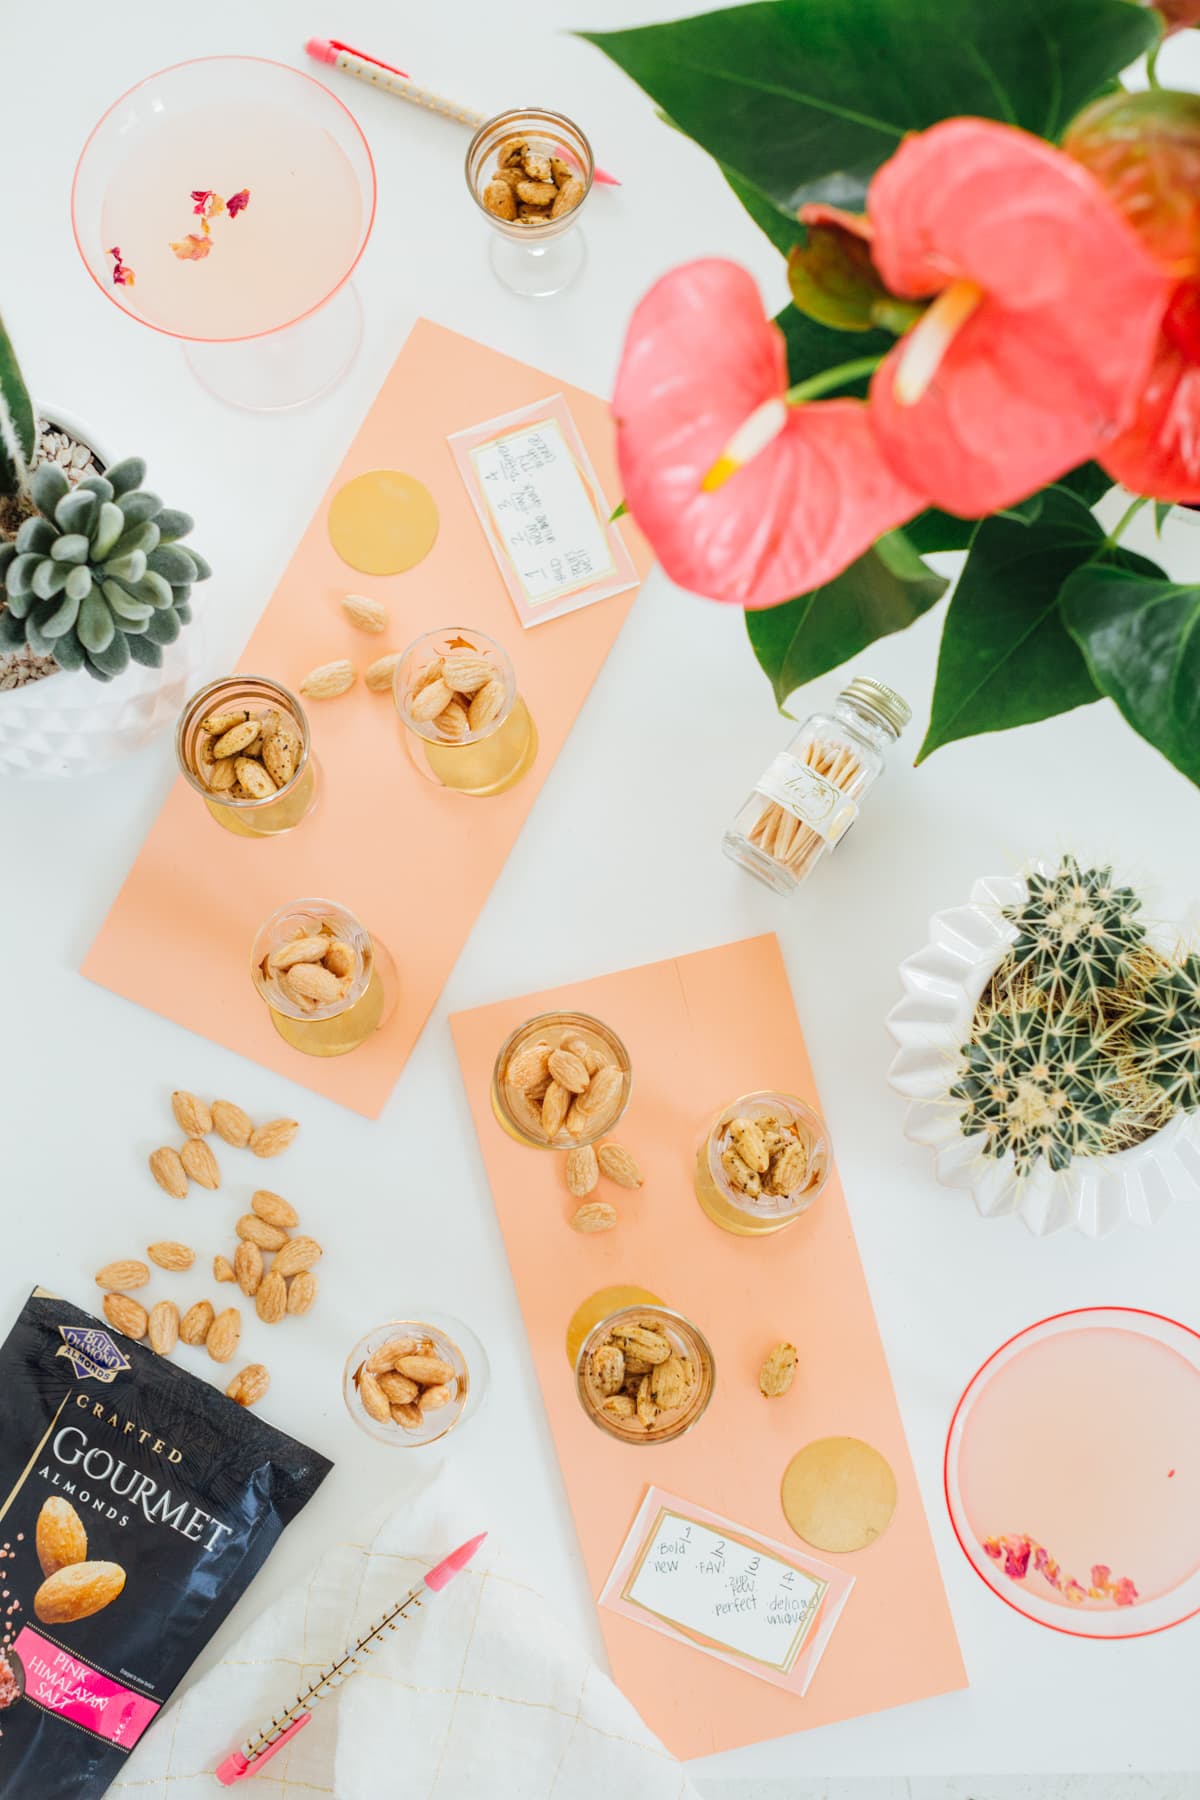 DIY Tasting Flight Boards by top Houston lifestyle blogger Ashley Rose of Sugar and Cloth #DIY #entertaining #almonds #appetizers #tastingflight